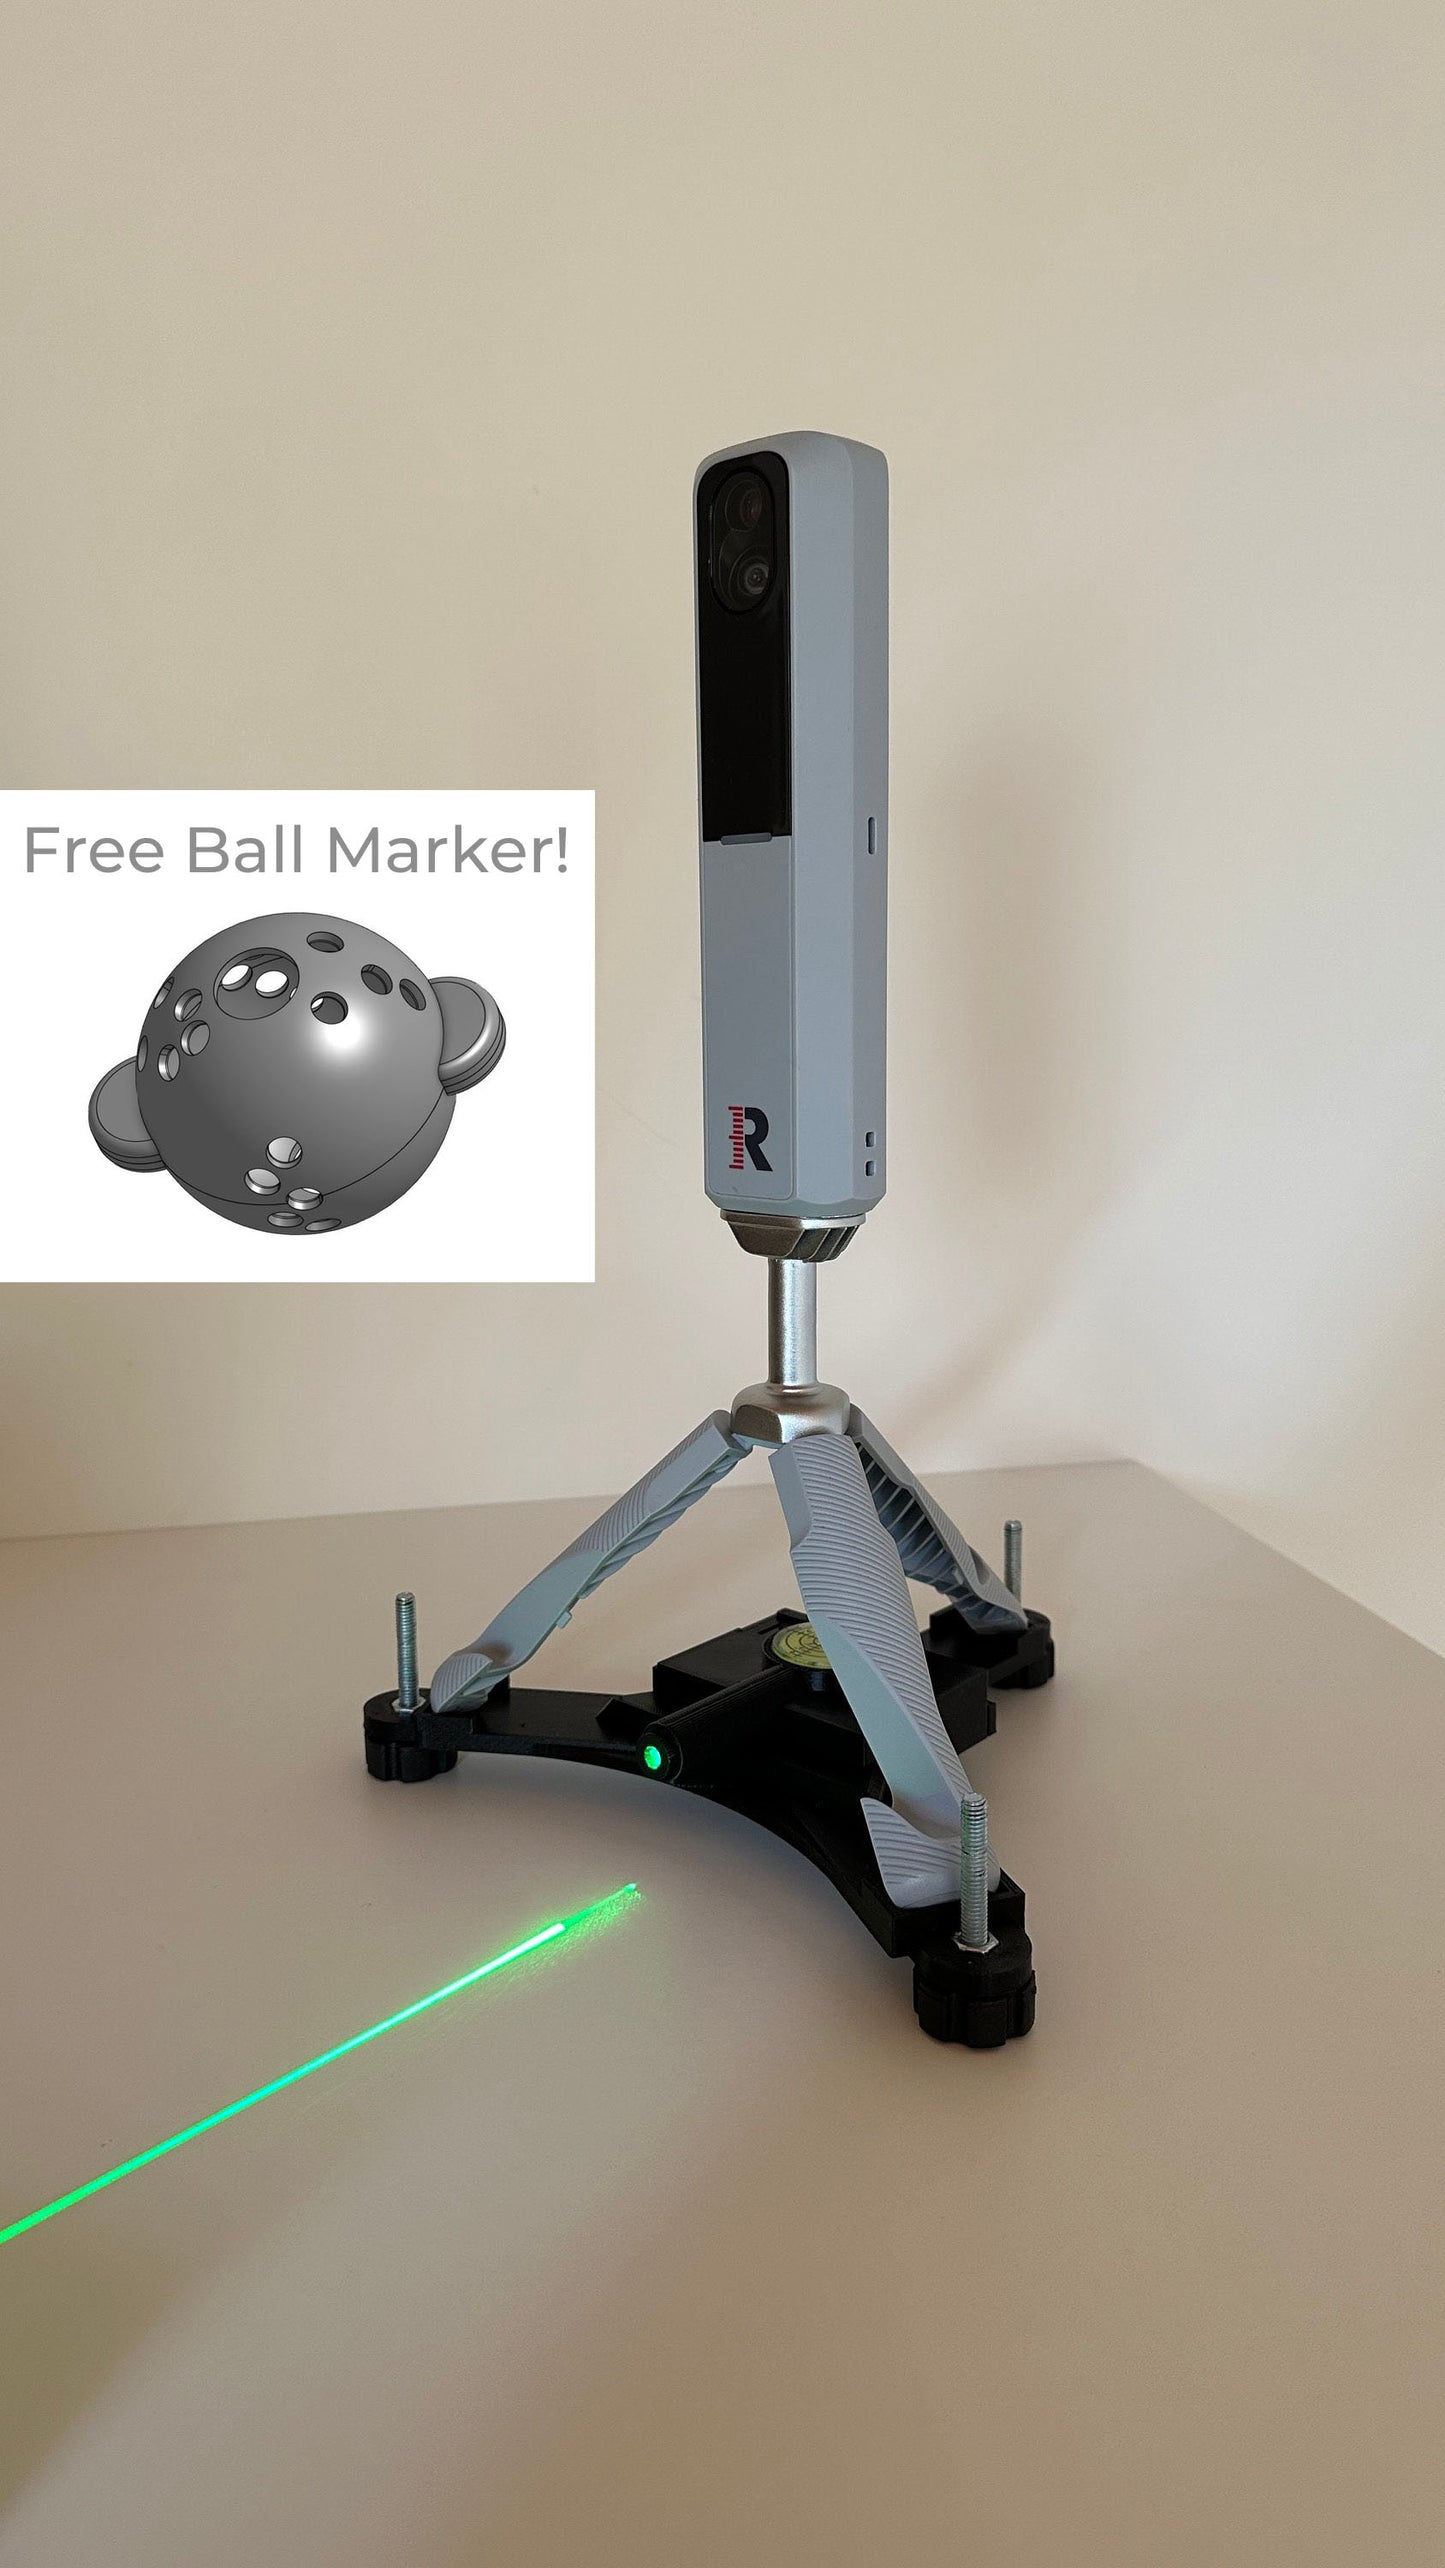 Rechargeable Rapsodo MLM 2 Pro alignment tool (Red or Green laser)